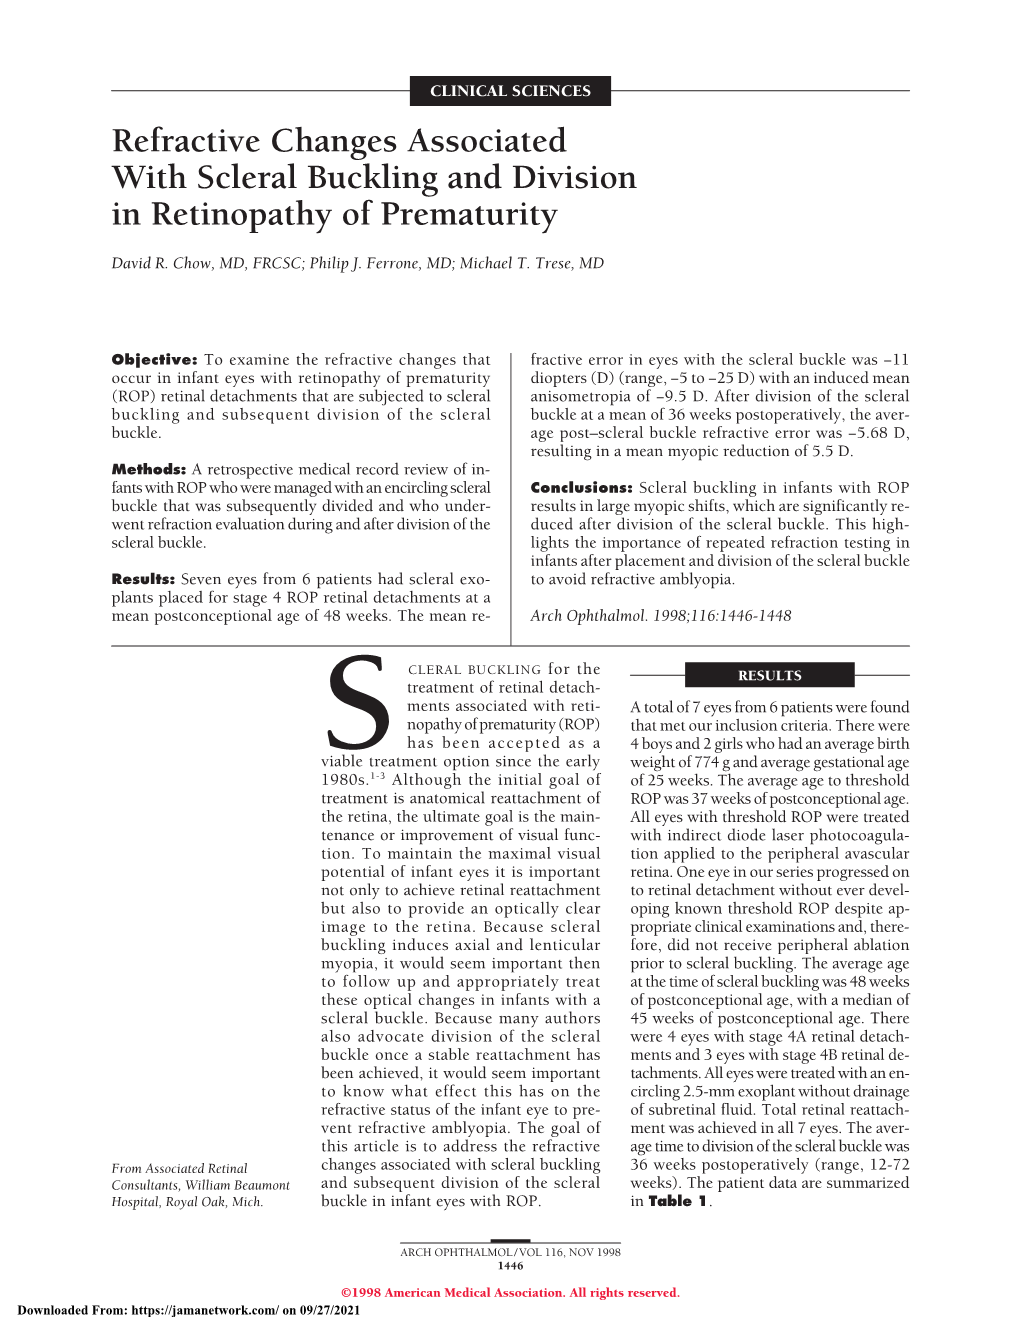 Refractive Changes Associated with Scleral Buckling and Division in Retinopathy of Prematurity